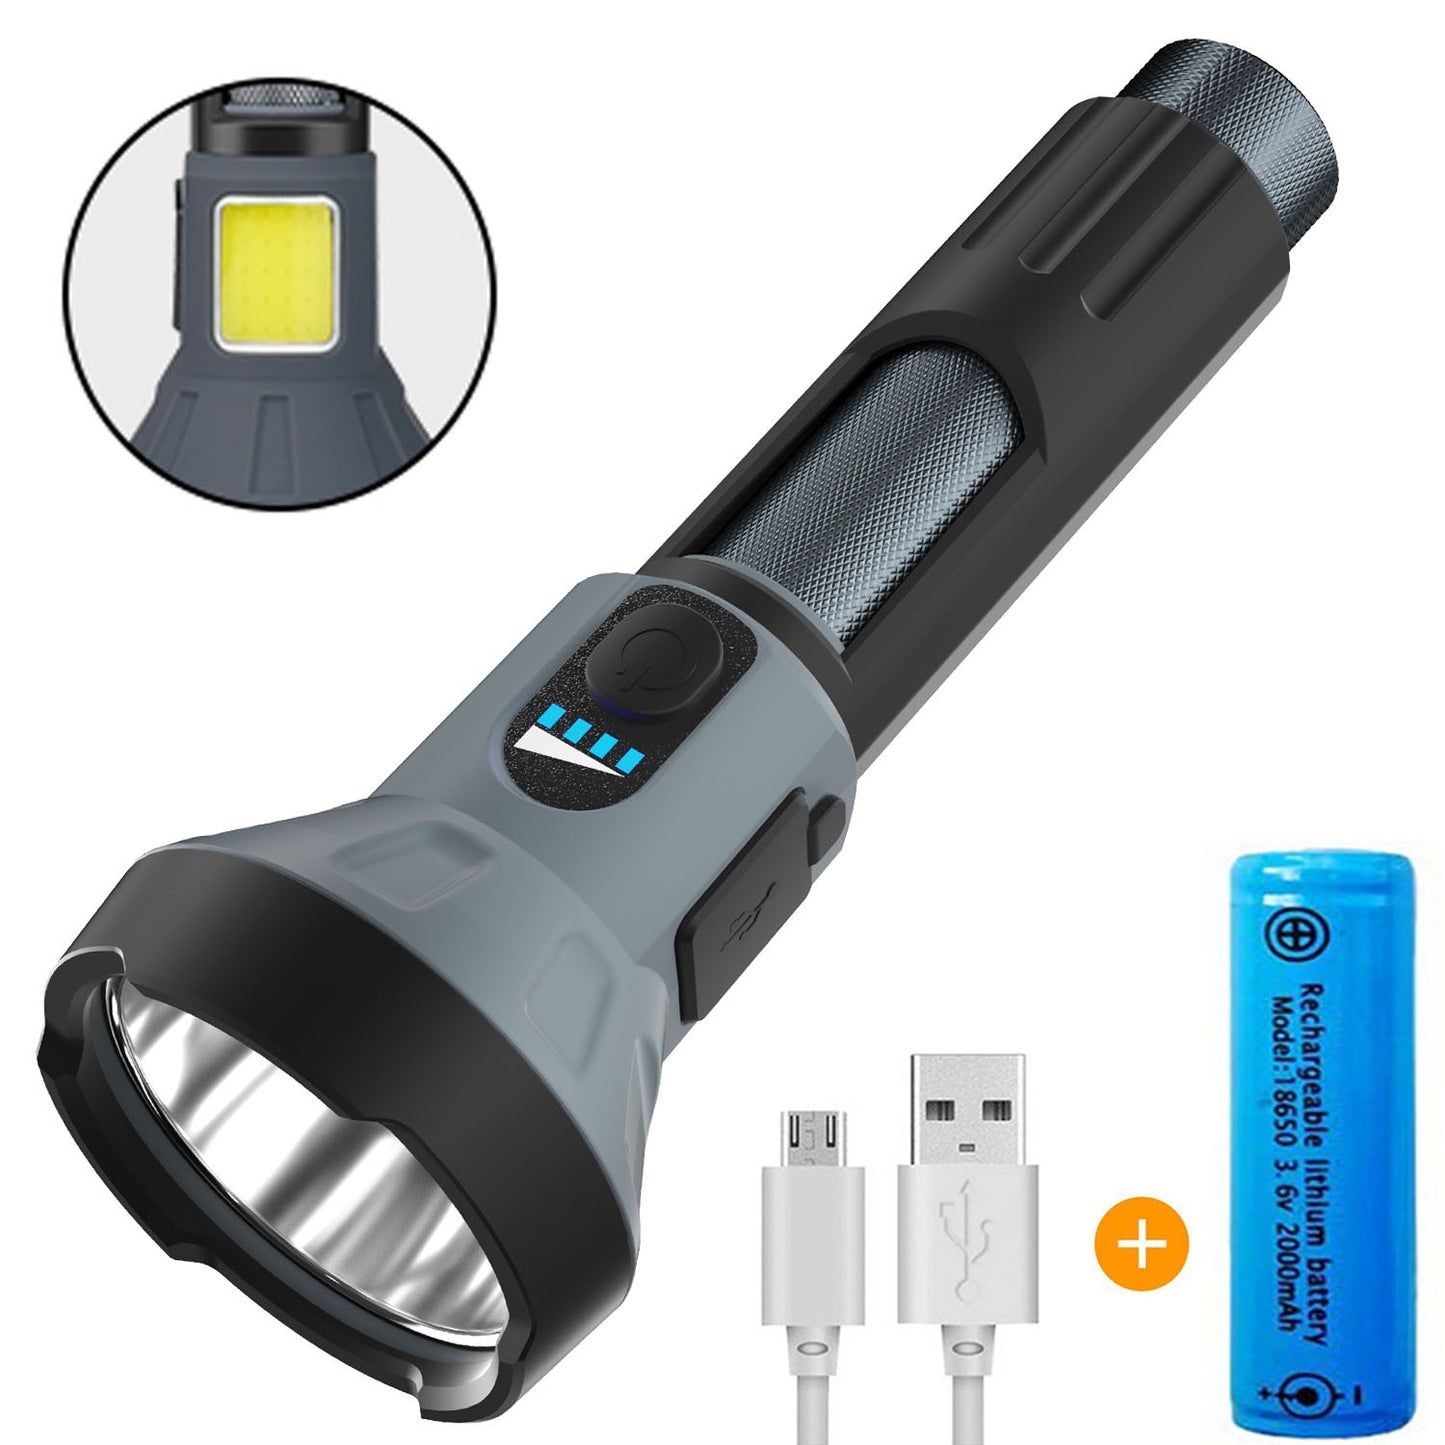 flashlights for camping, rechargeable flashlights high lumens, Helius,household flashlights, flashlights for emergencies, led rechargeable flashlight, 18650 flashlight, super bright led flashlight